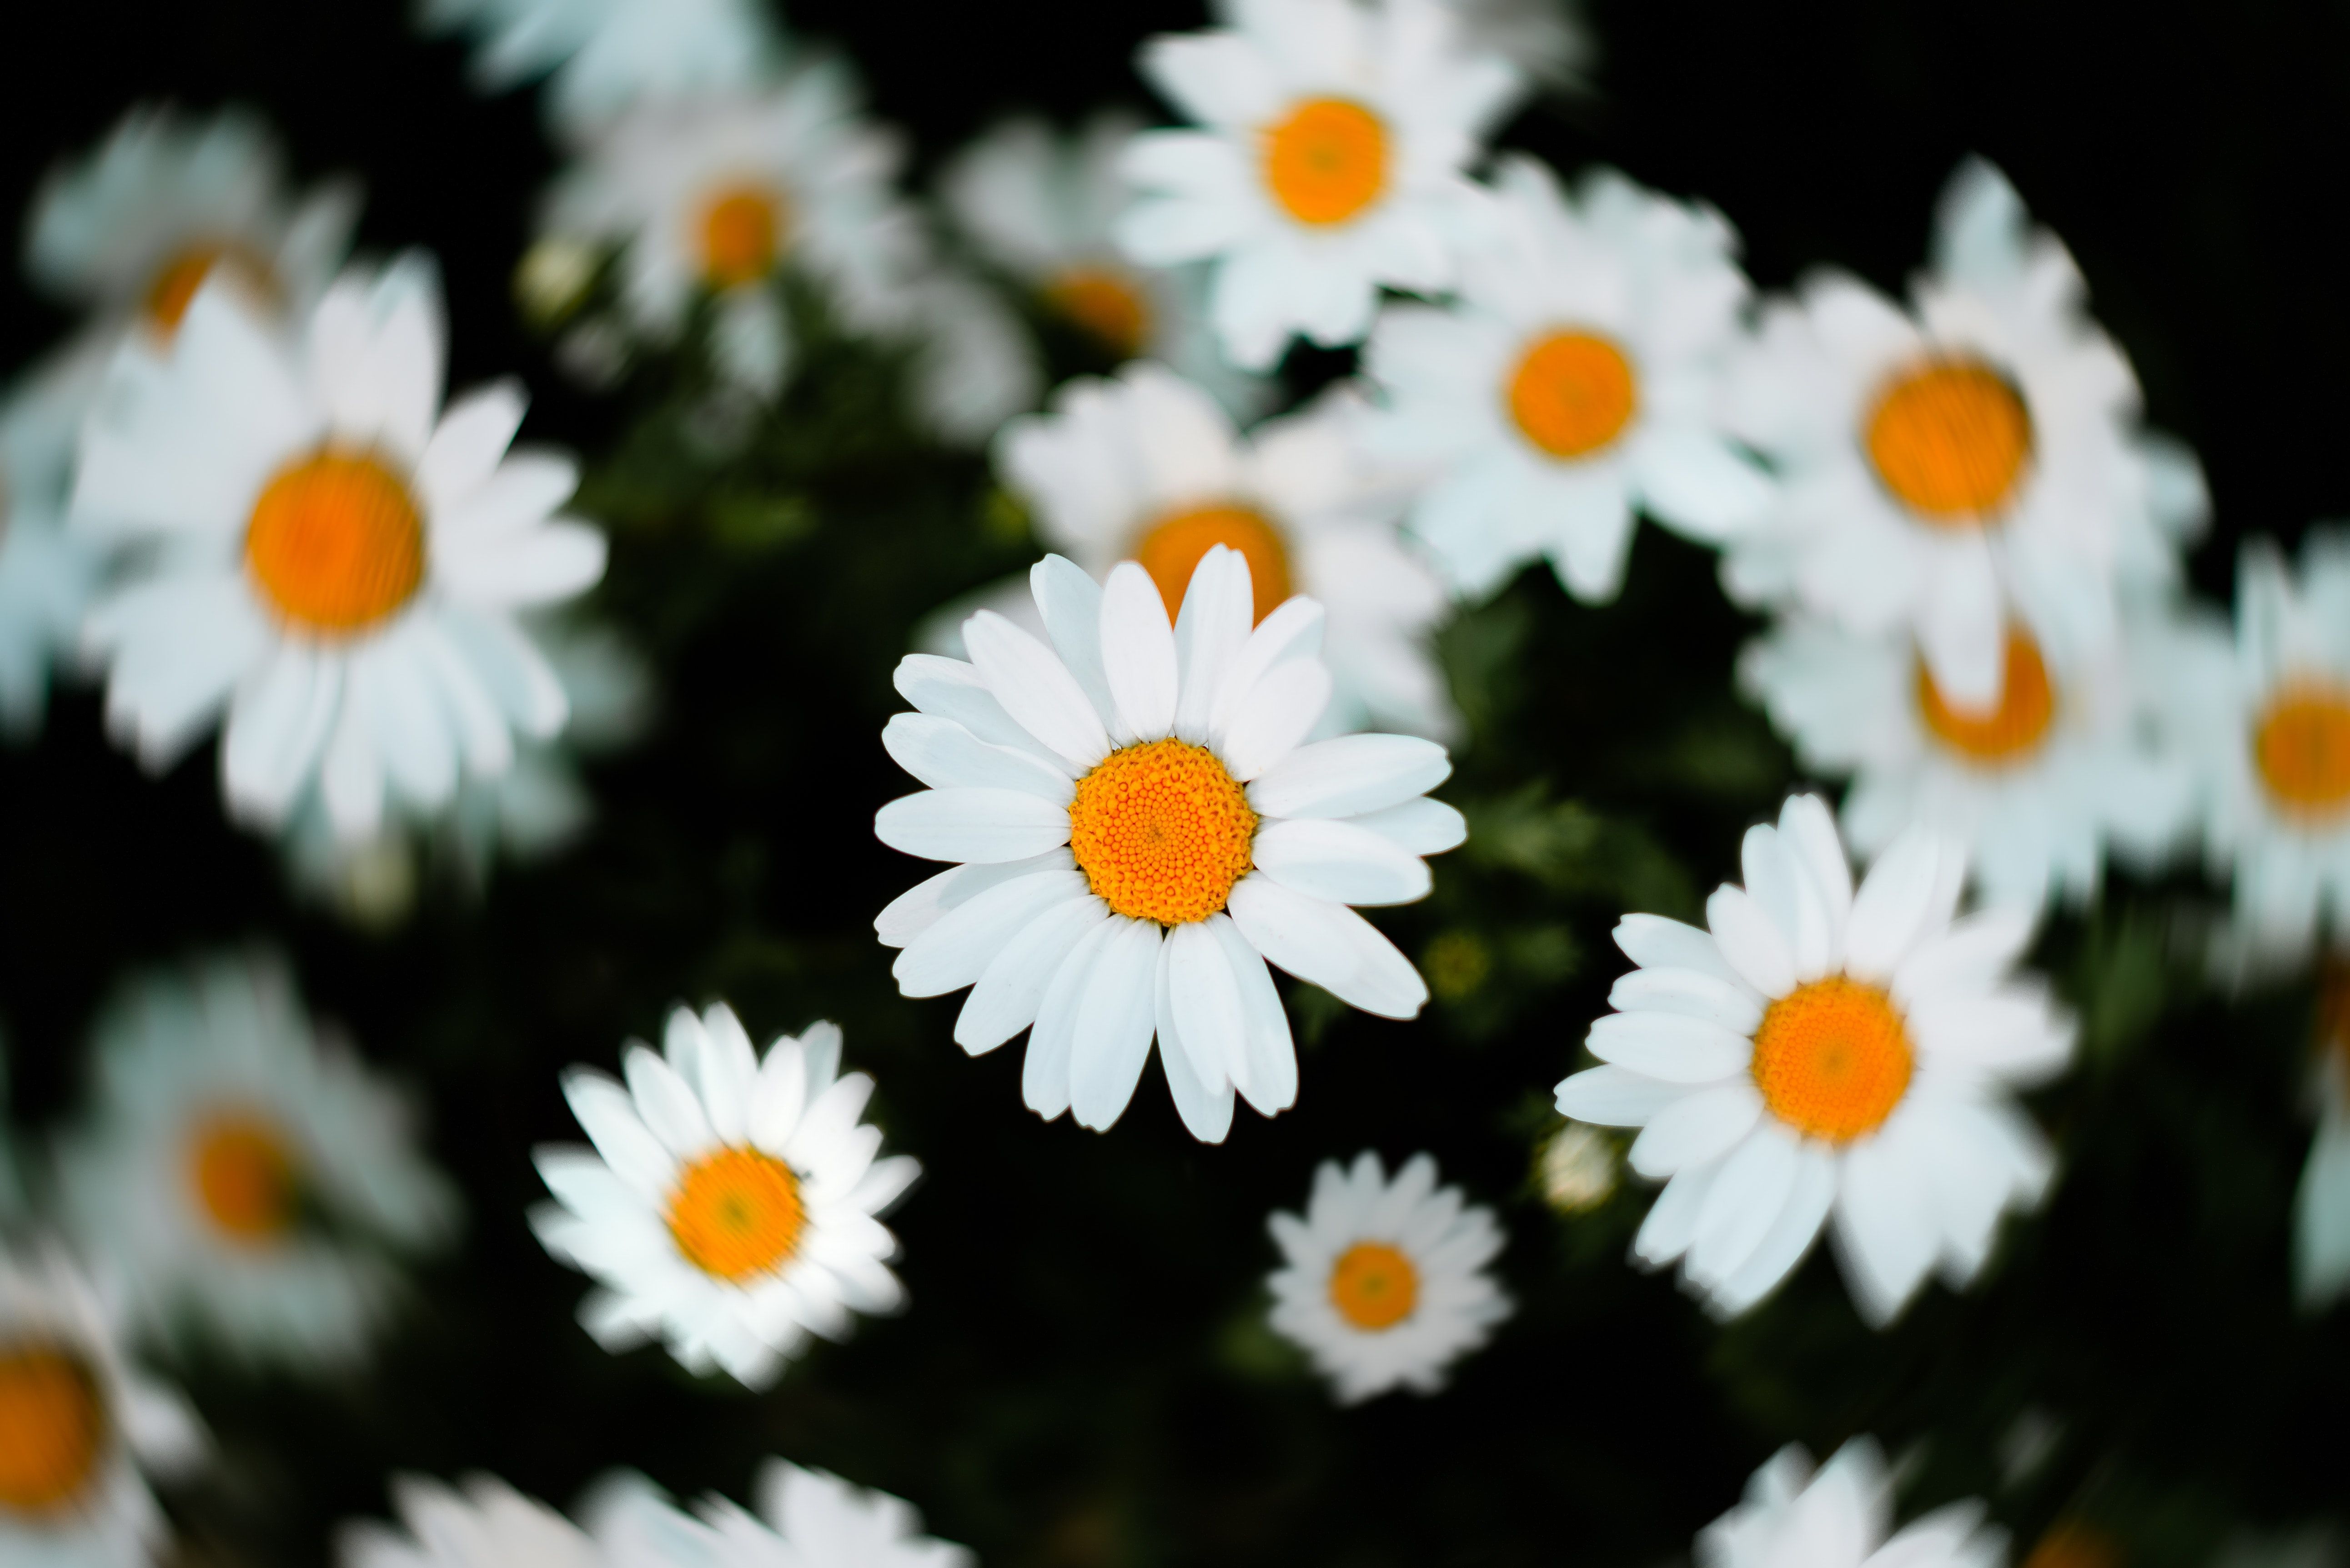 Daisy 4K wallpaper for your desktop or mobile screen free and easy to download